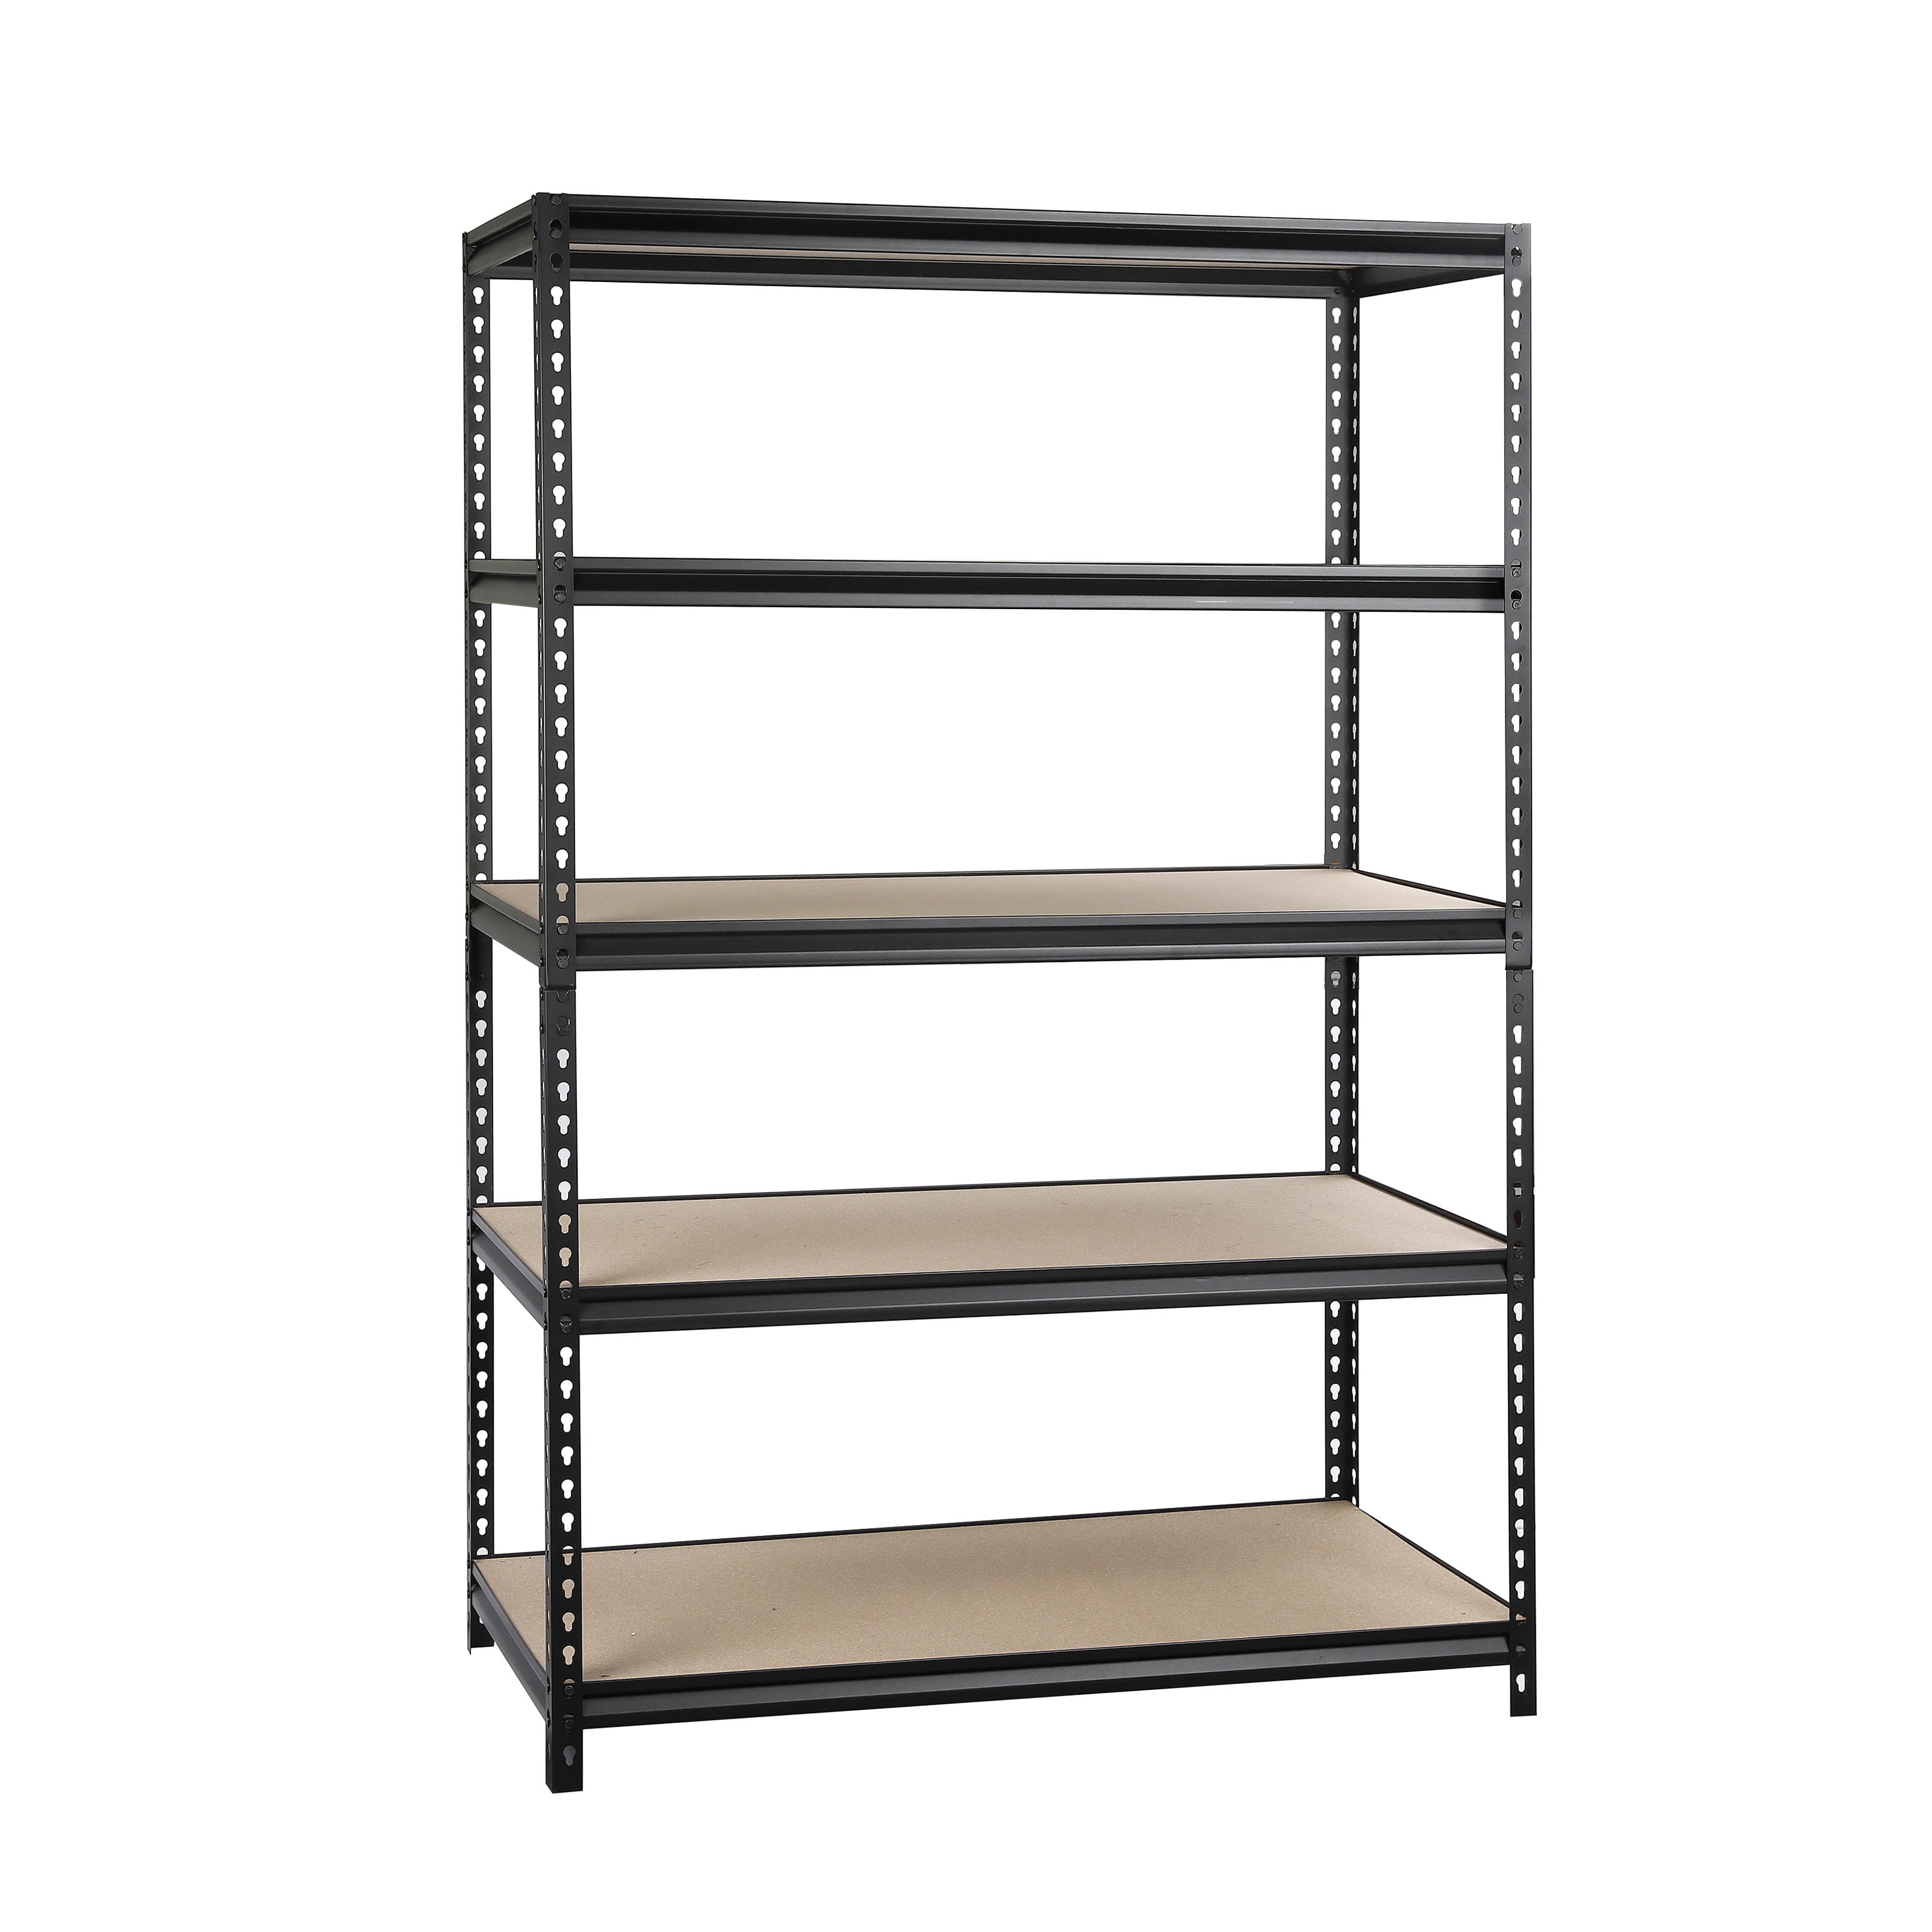 48" WORKPRO 5-Tier Freestanding Shelf w/ Particle Board Shelves (800-Lb. Capacity) $89 + Free Shipping